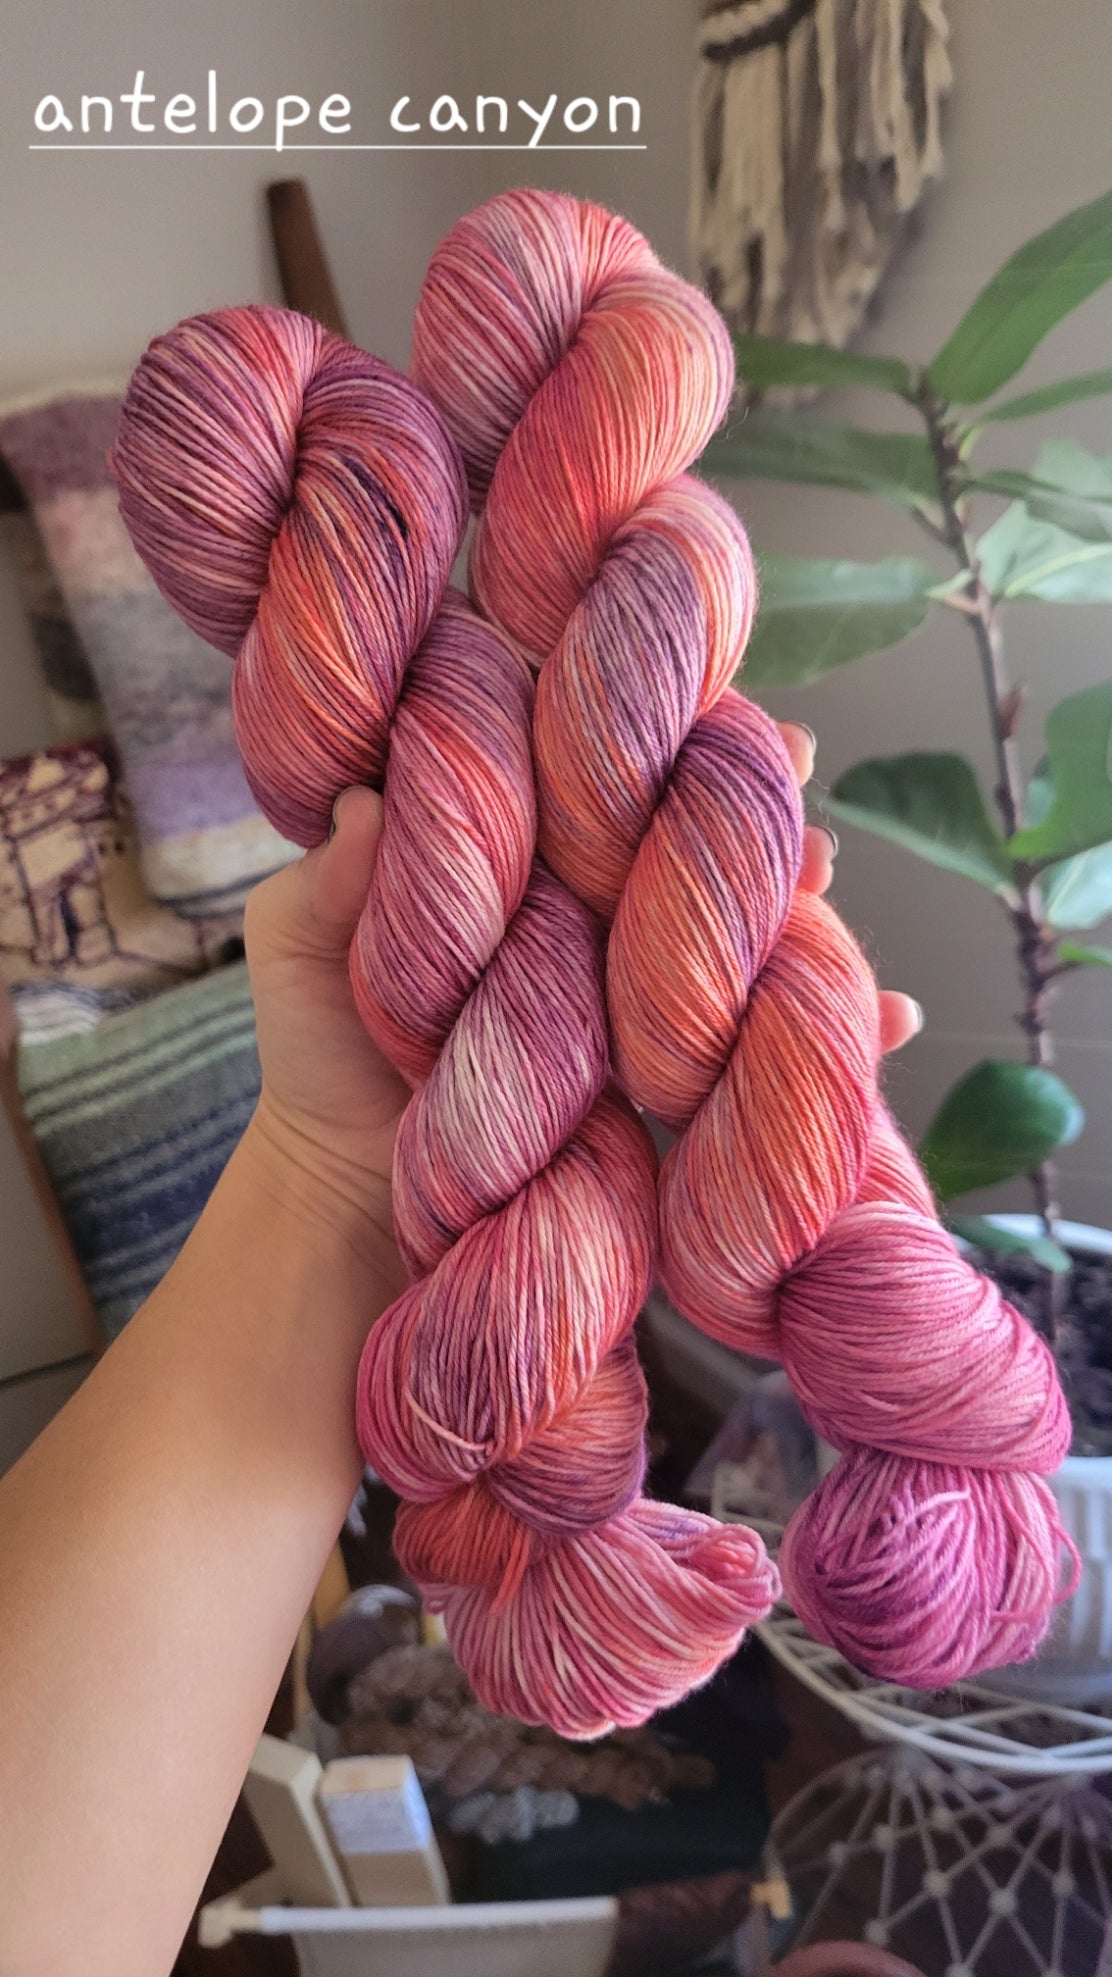 From the Open Road - Monthly Yarn Club